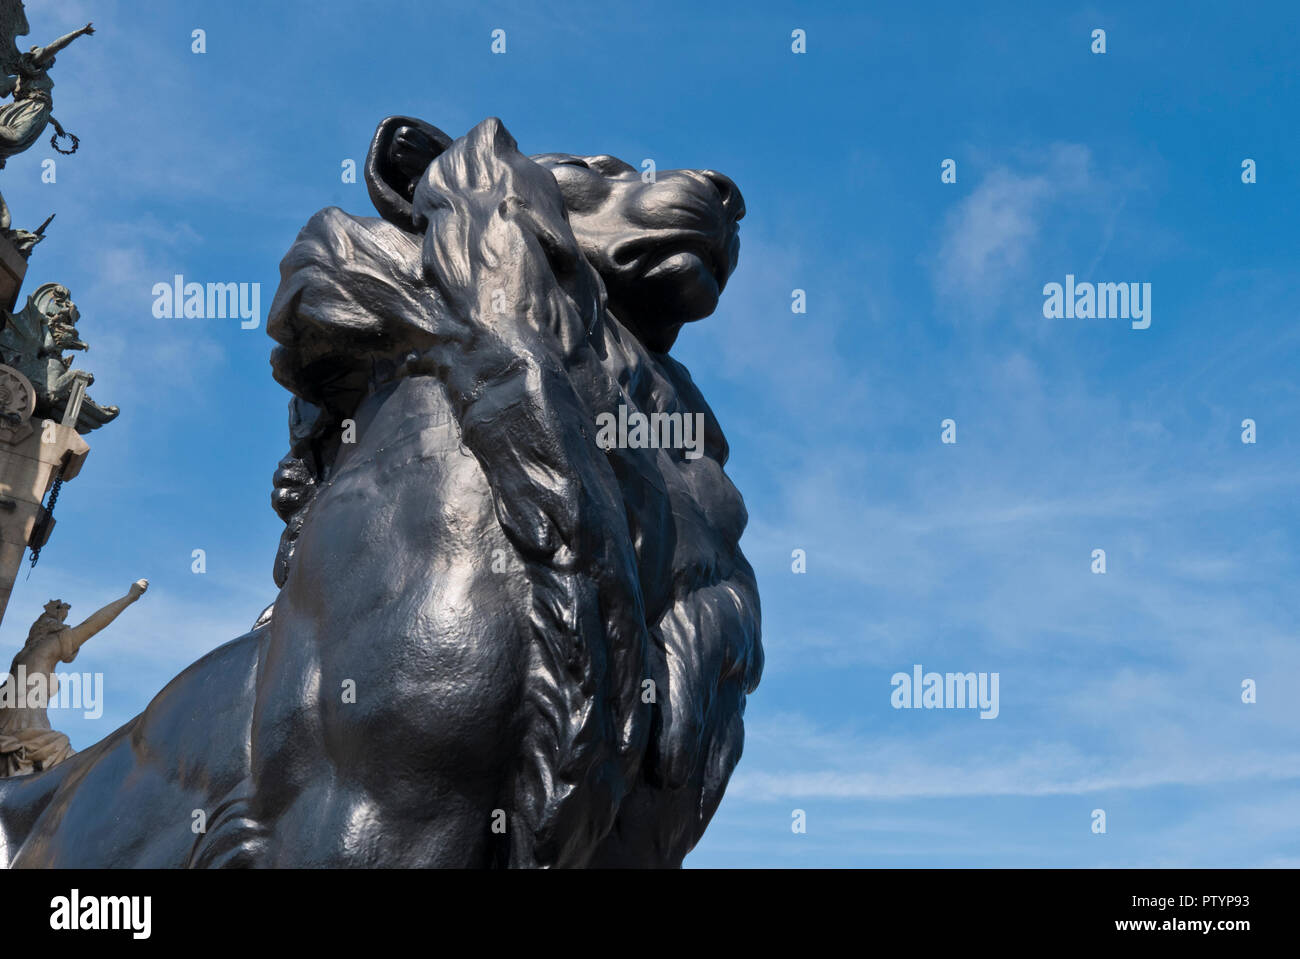 A lion statue as part of the Christopher Columbus monument, Barcelona, Spain Stock Photo